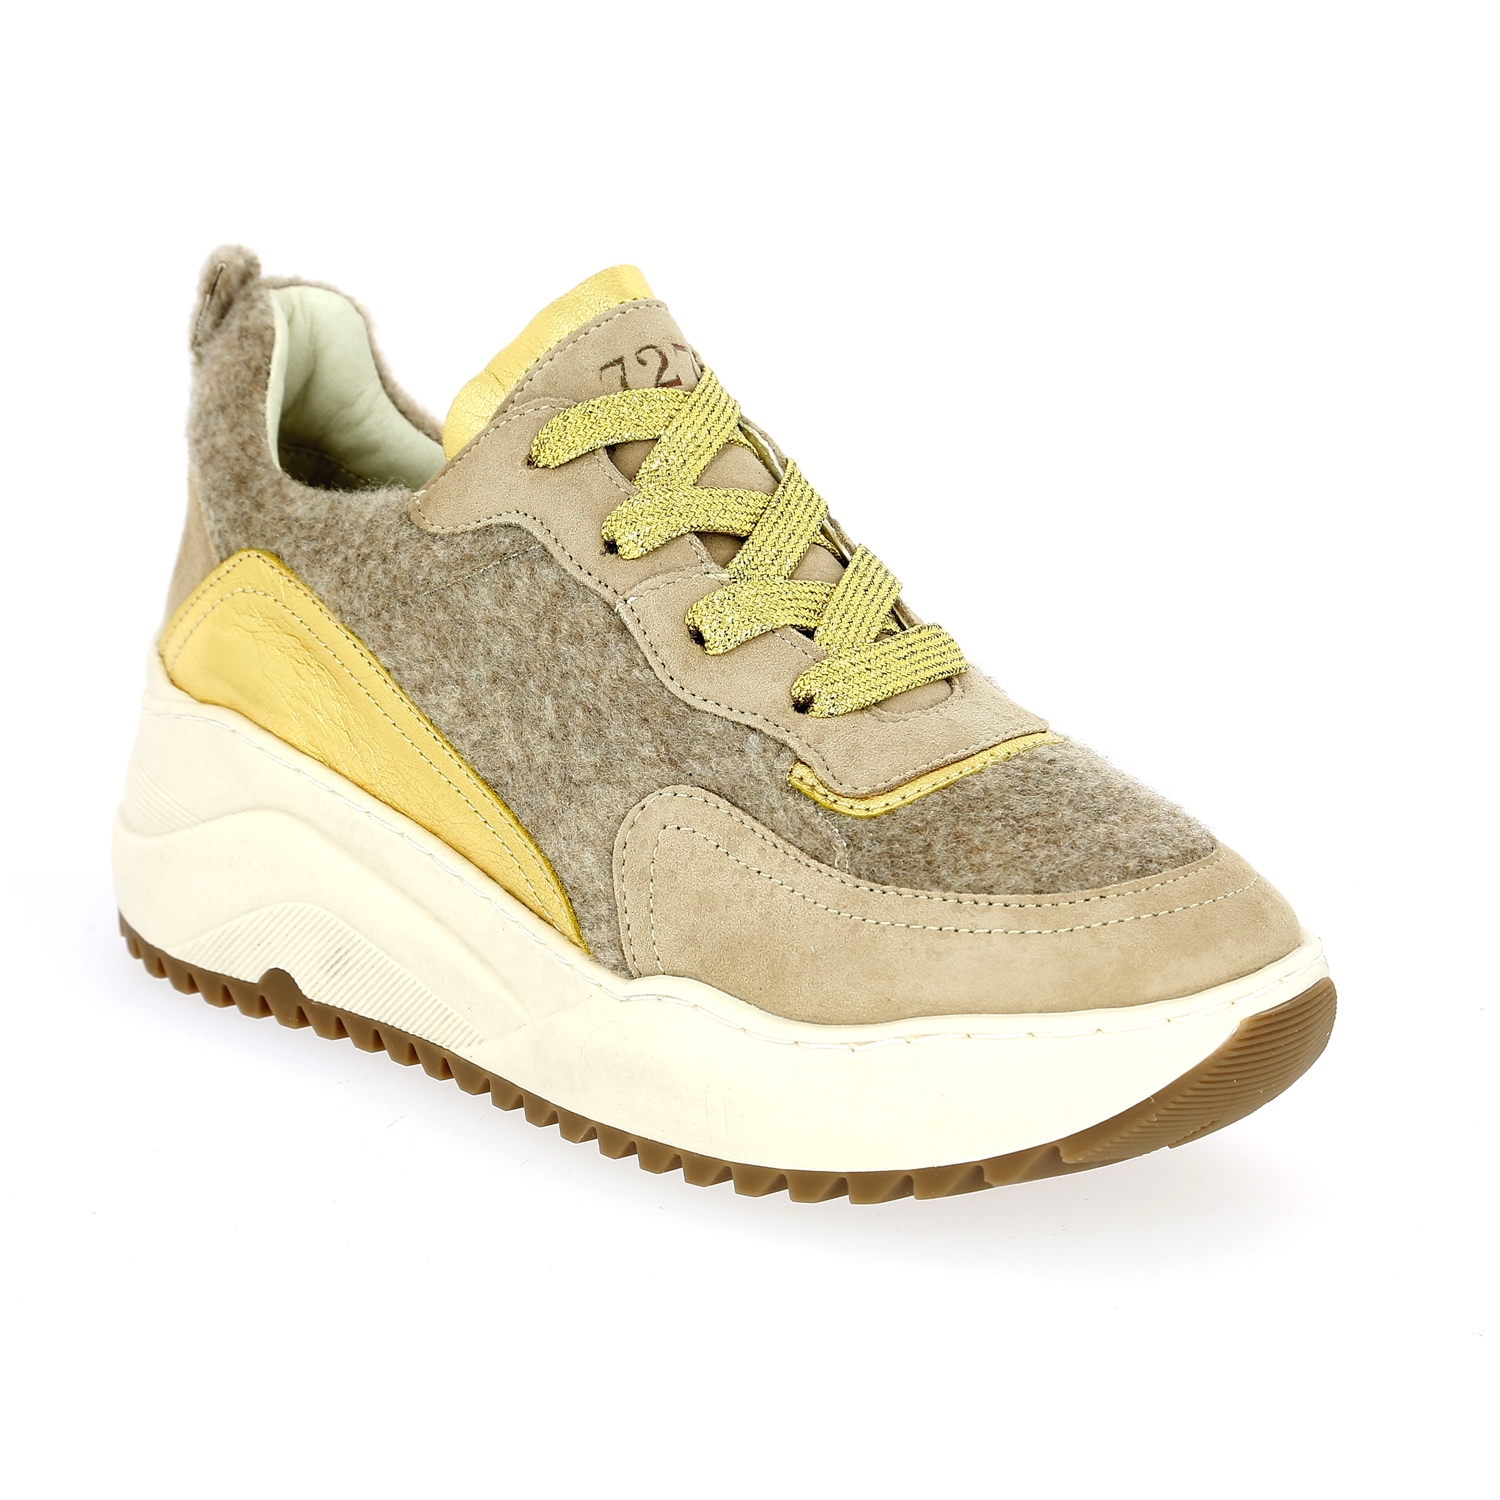 Cycleur De Luxe Sneakers taupe